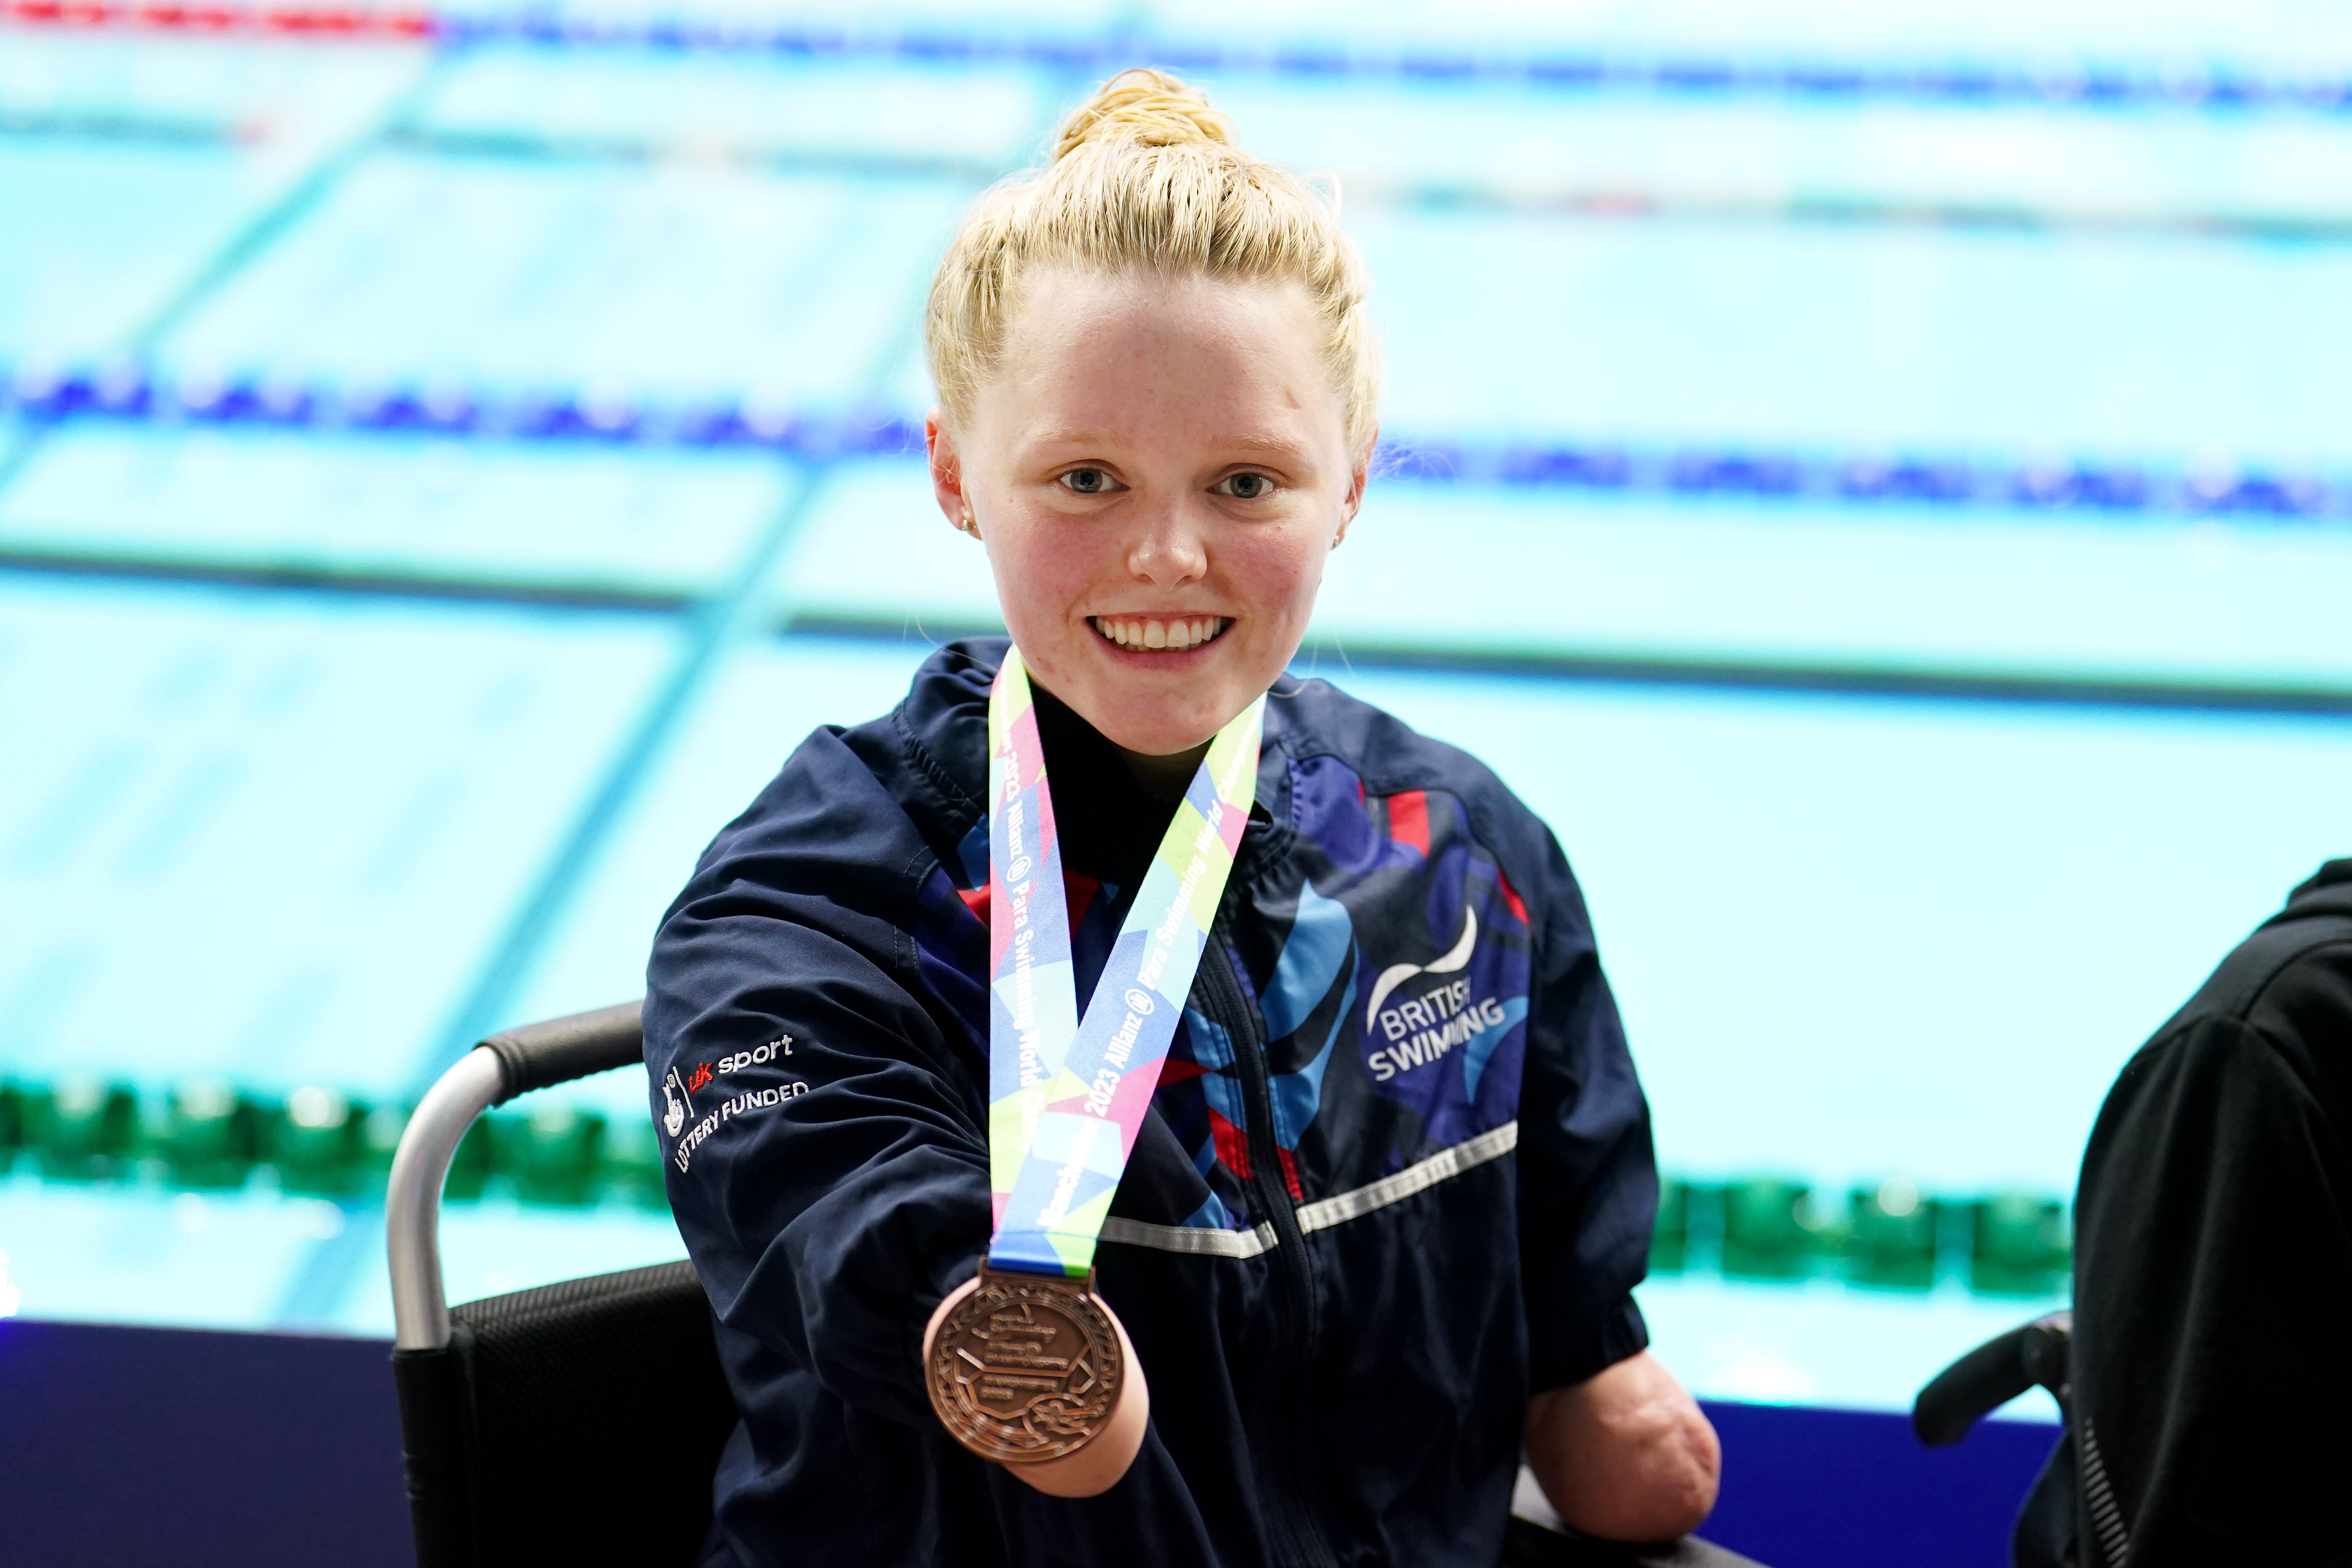 Paralympic swimming sensation Ellie Challis could not access her Premier Inn hotel room because of a broken lift